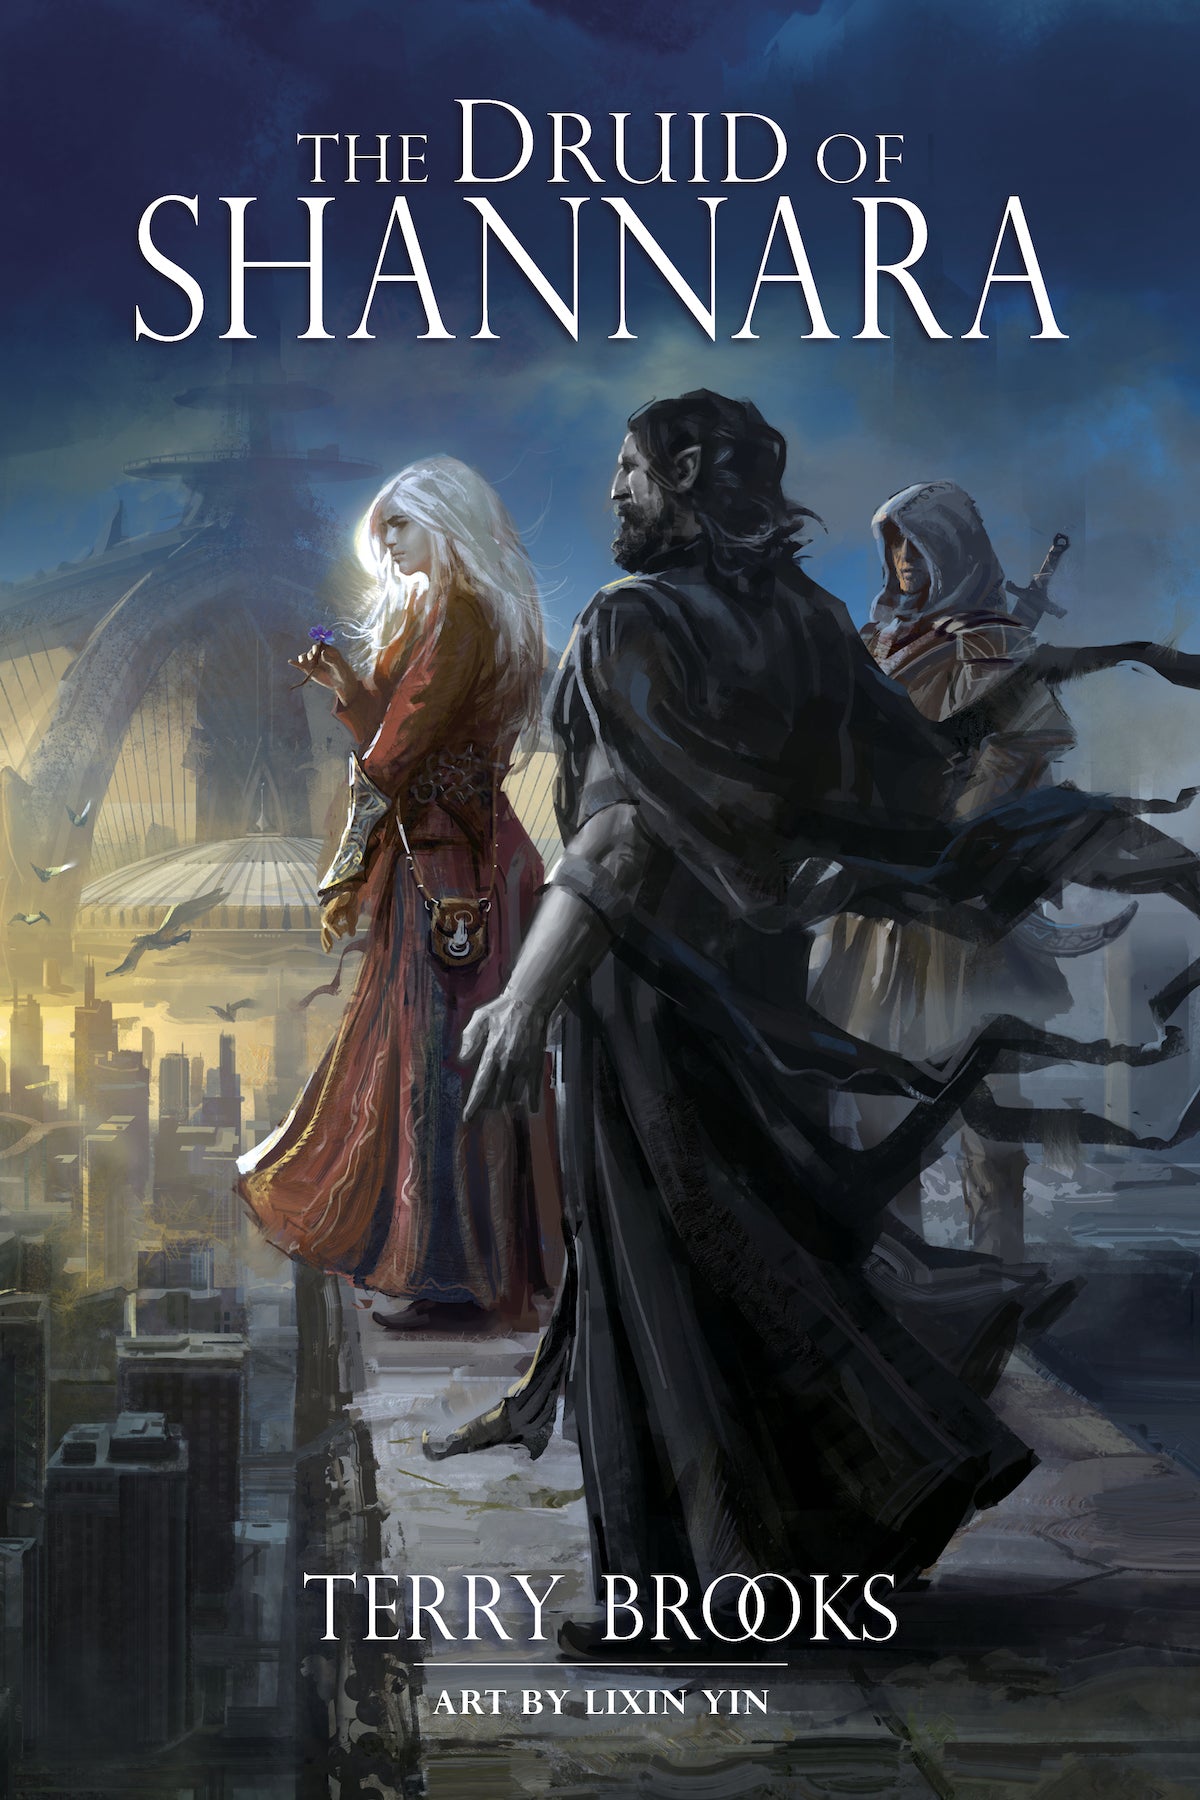 The Druid of Shannara S&N Hardcover by Terry Brooks